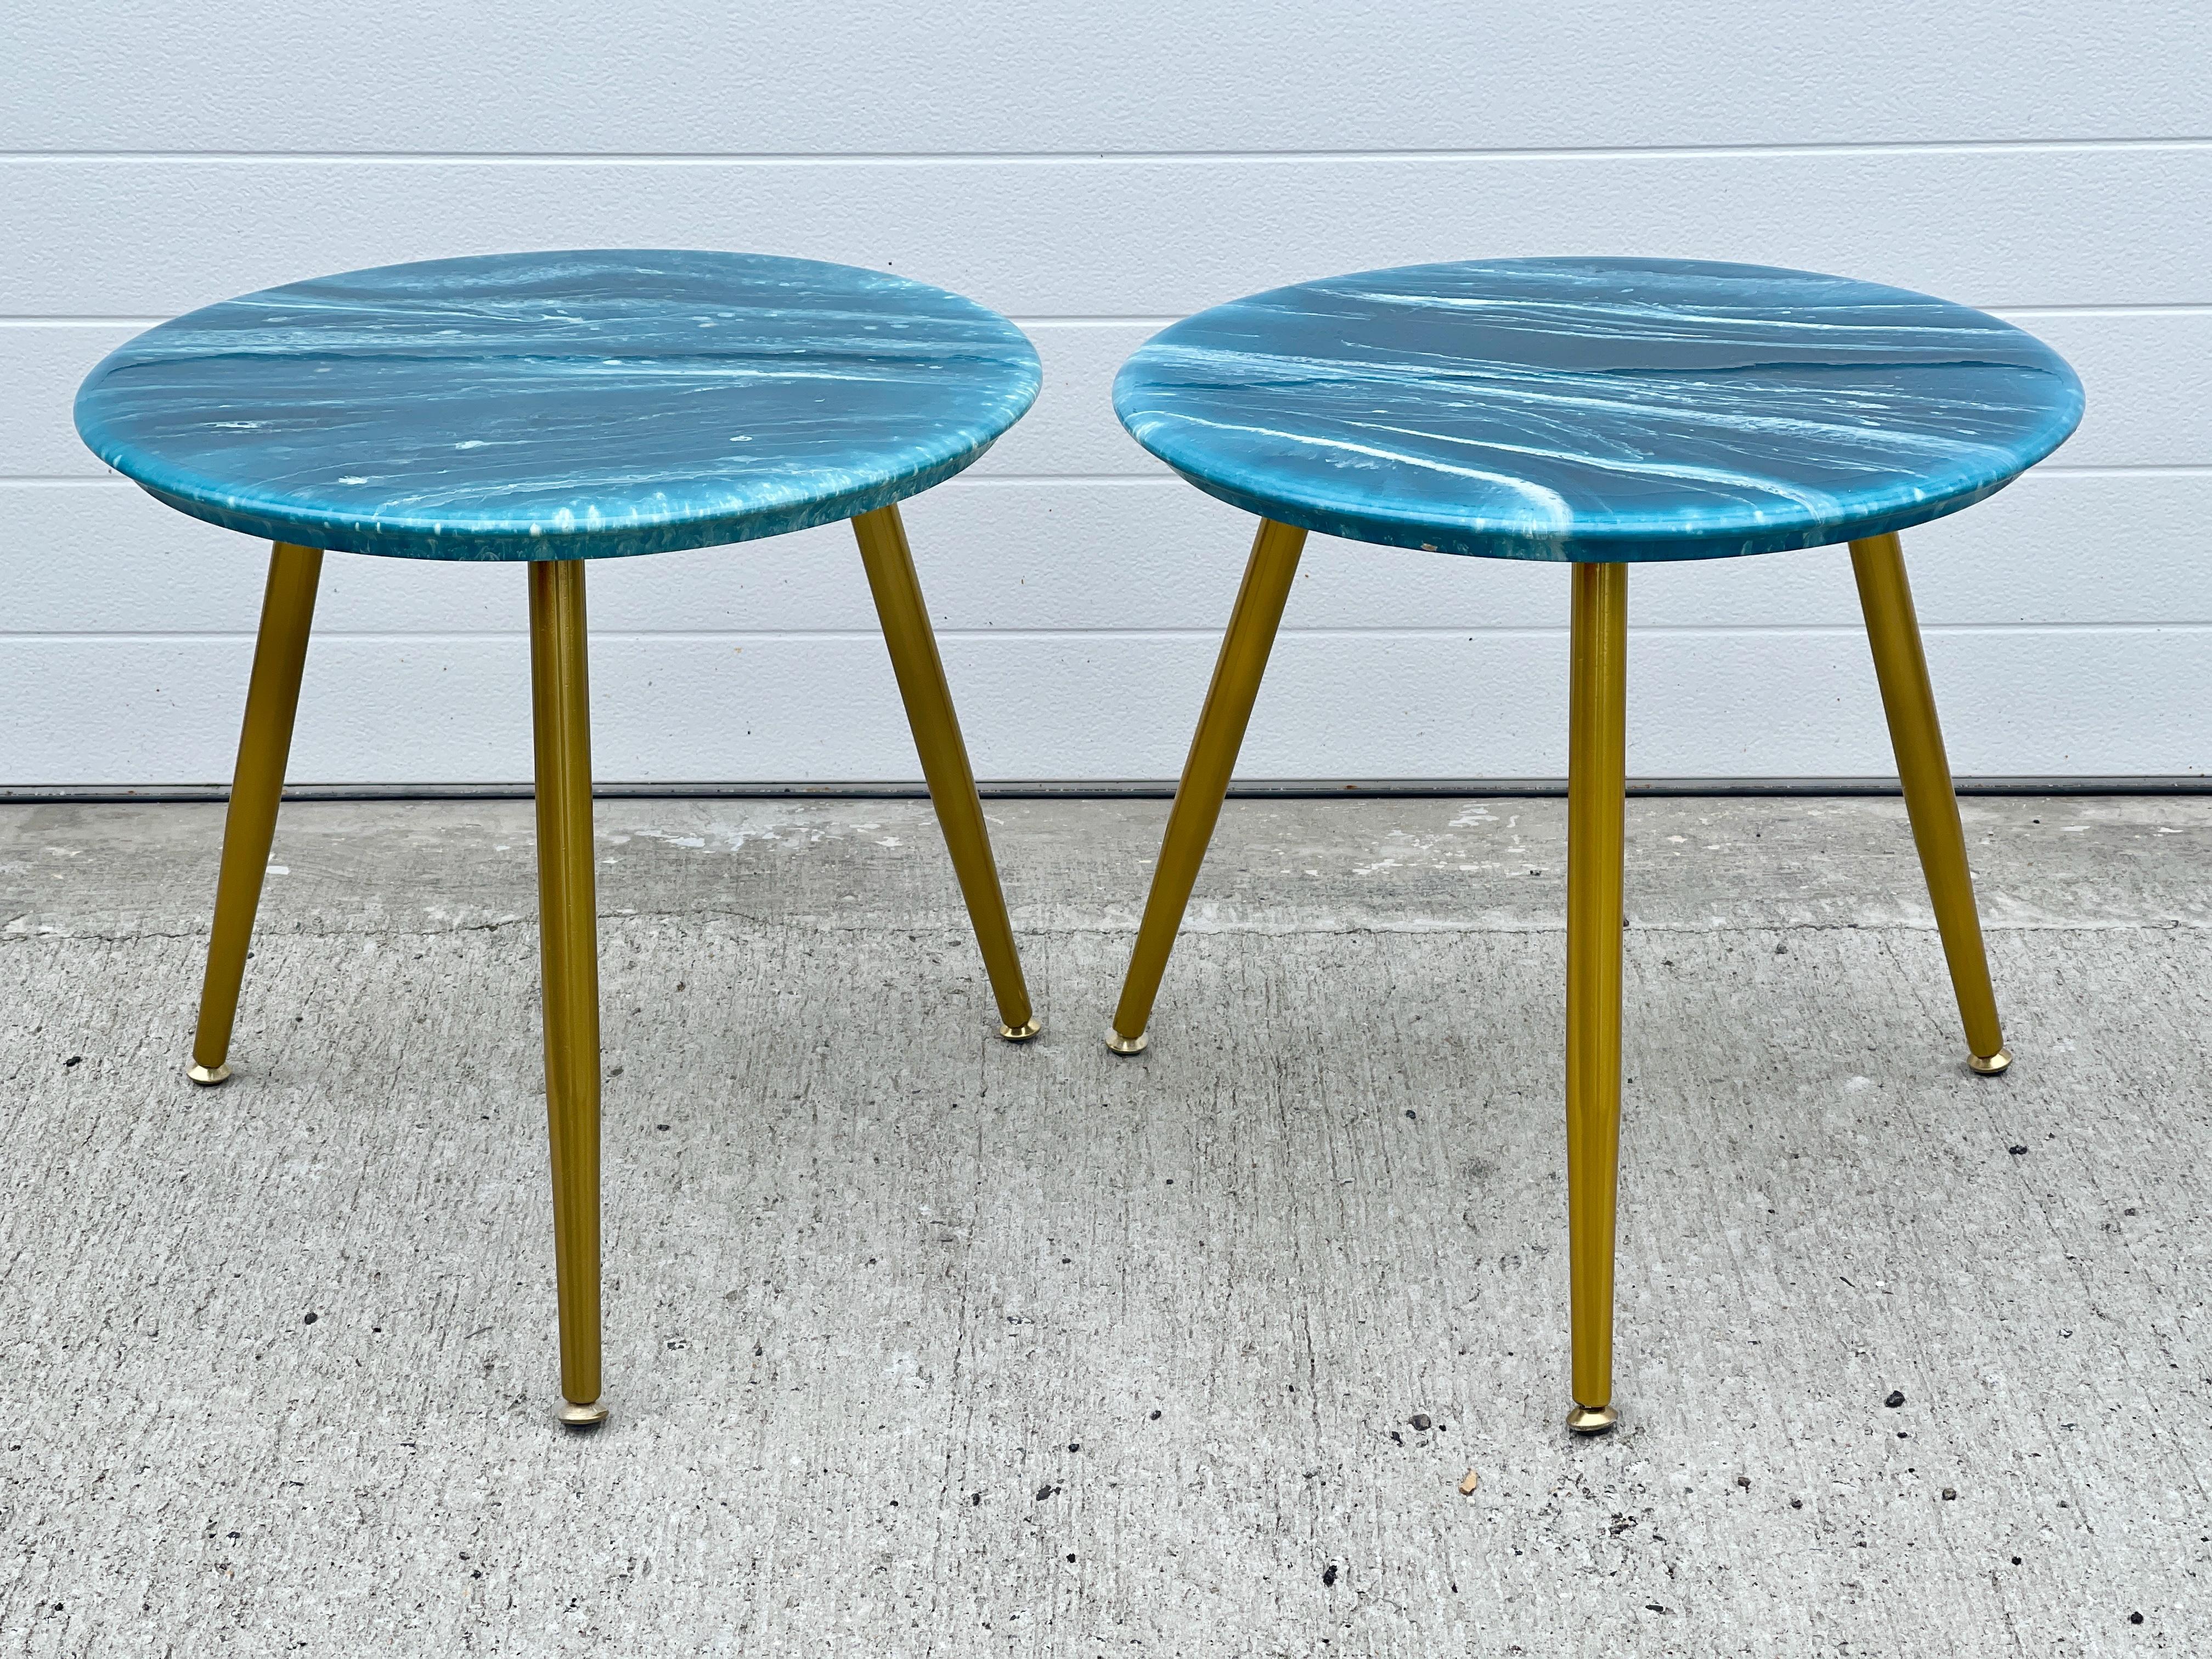 Pair of round three legged round top side tables consisting of an 18 inch diameter 